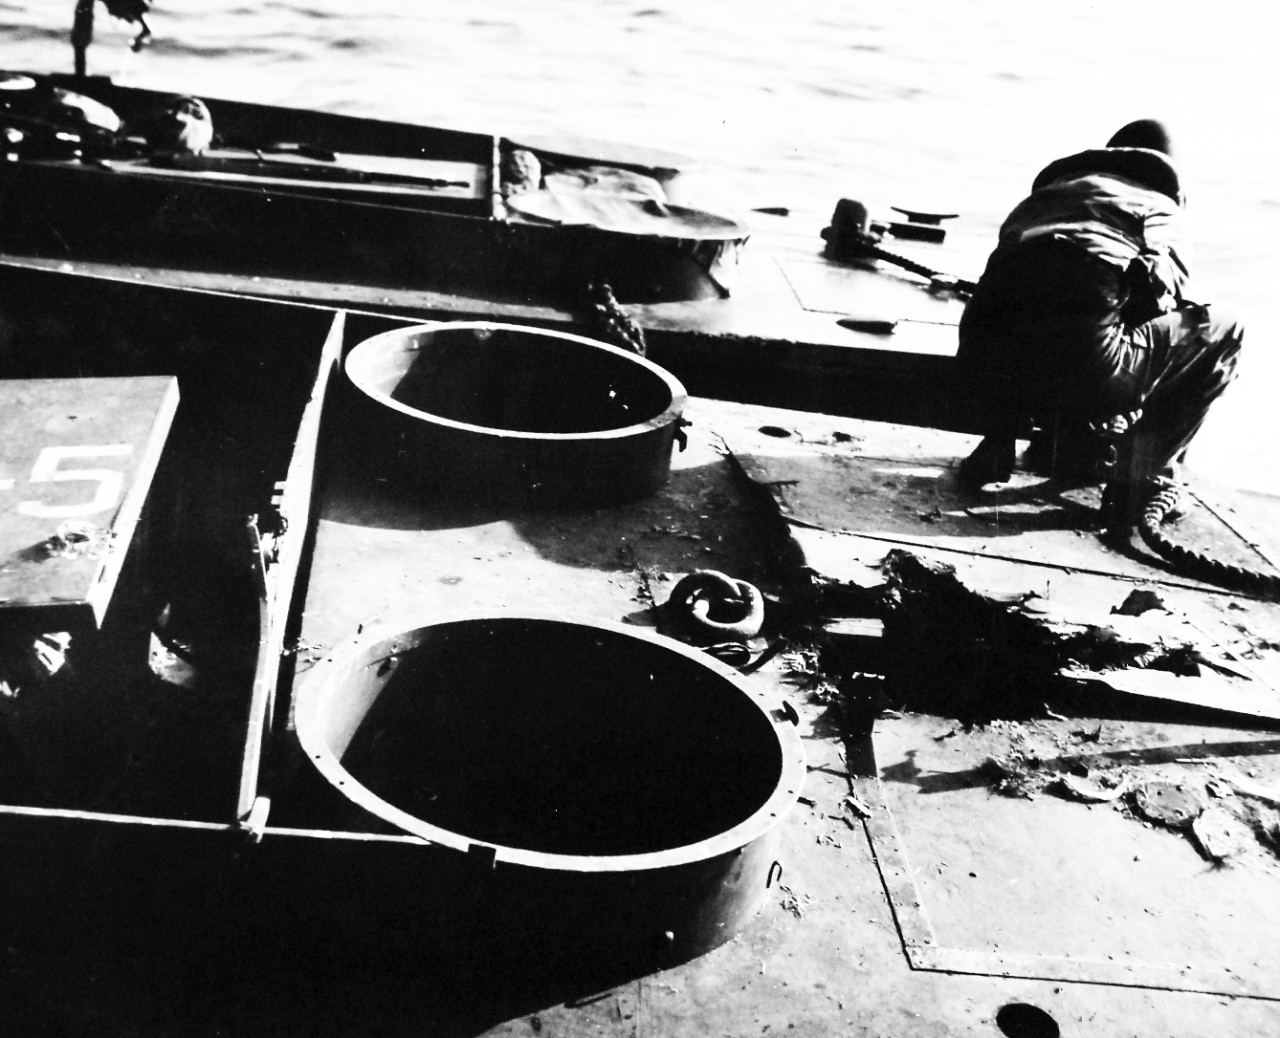 80-G-54389:  Bougainville Campaign, November 1943-August 1945.    Gaping holes marks entry of Japanese missile druing the U.S. attack.  The LCVPs are difficult targets, November 1, 1943.   U.S. Navy photograph, now in the collections of the National Archives.  (2016/06/28).